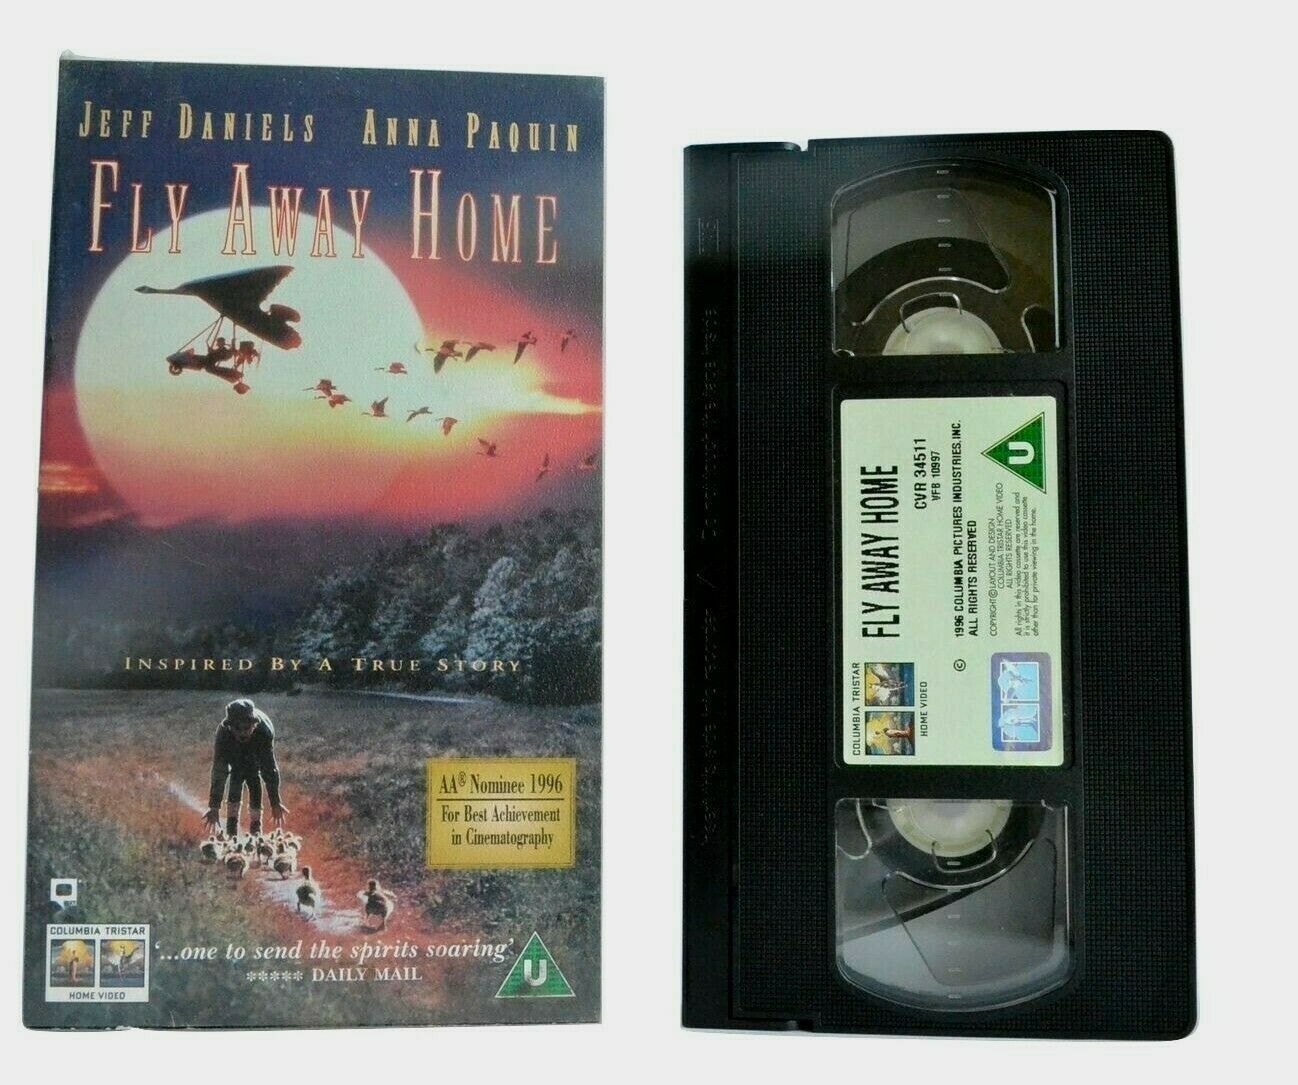 Fly Away Home (aka Father Goose) - Drama Comedy - Jeff Daniels/Anna Paquin - VHS-